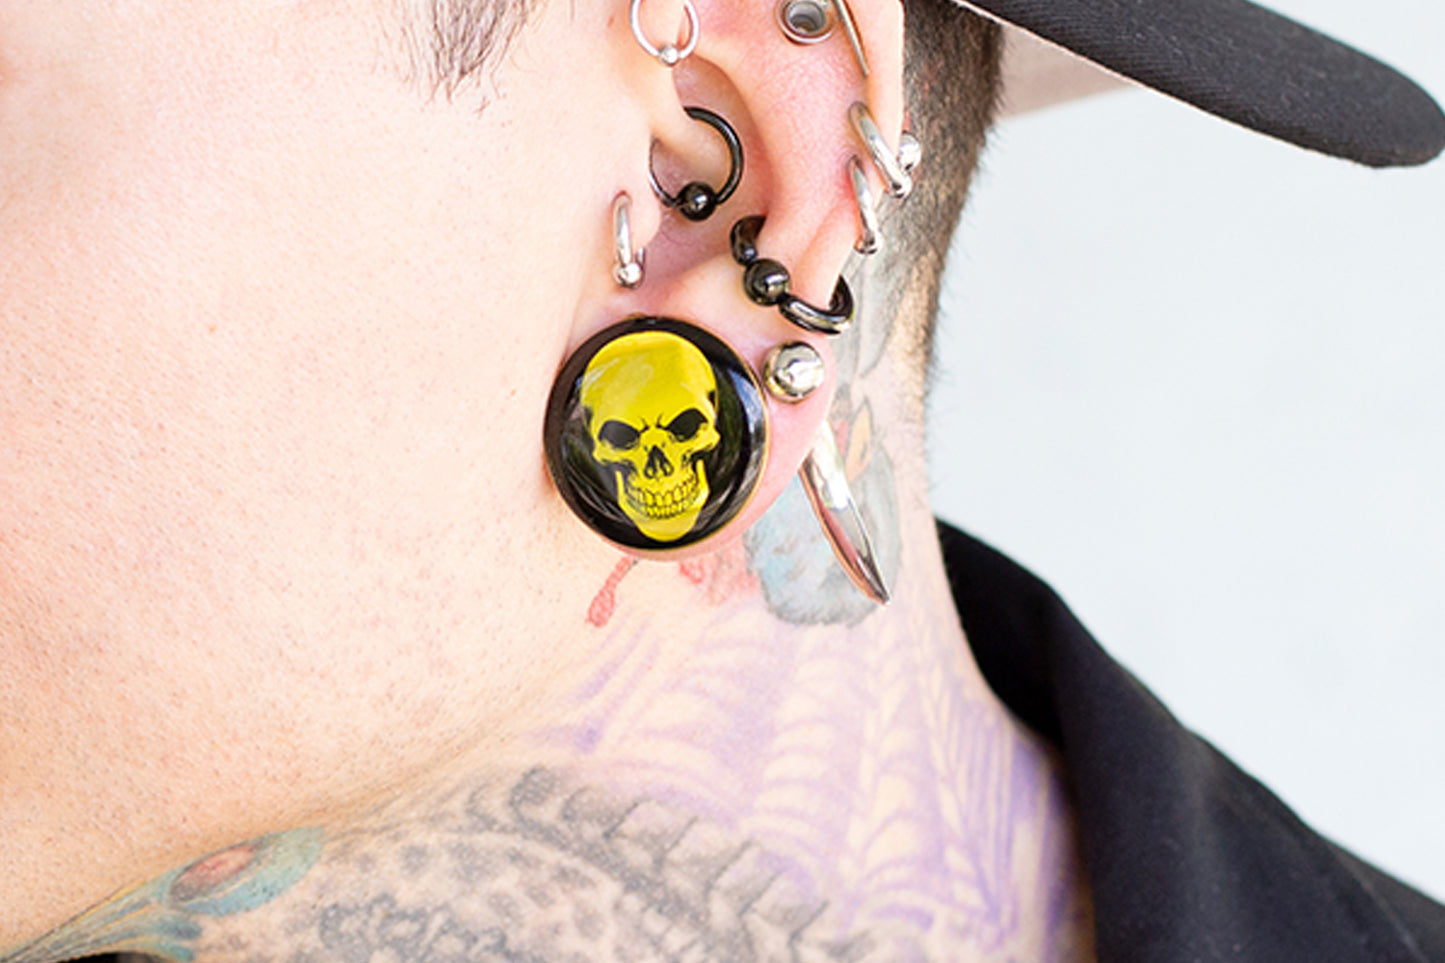 Gold Holo-Skull Stainless Steel Plugs (Pair) - PSS89